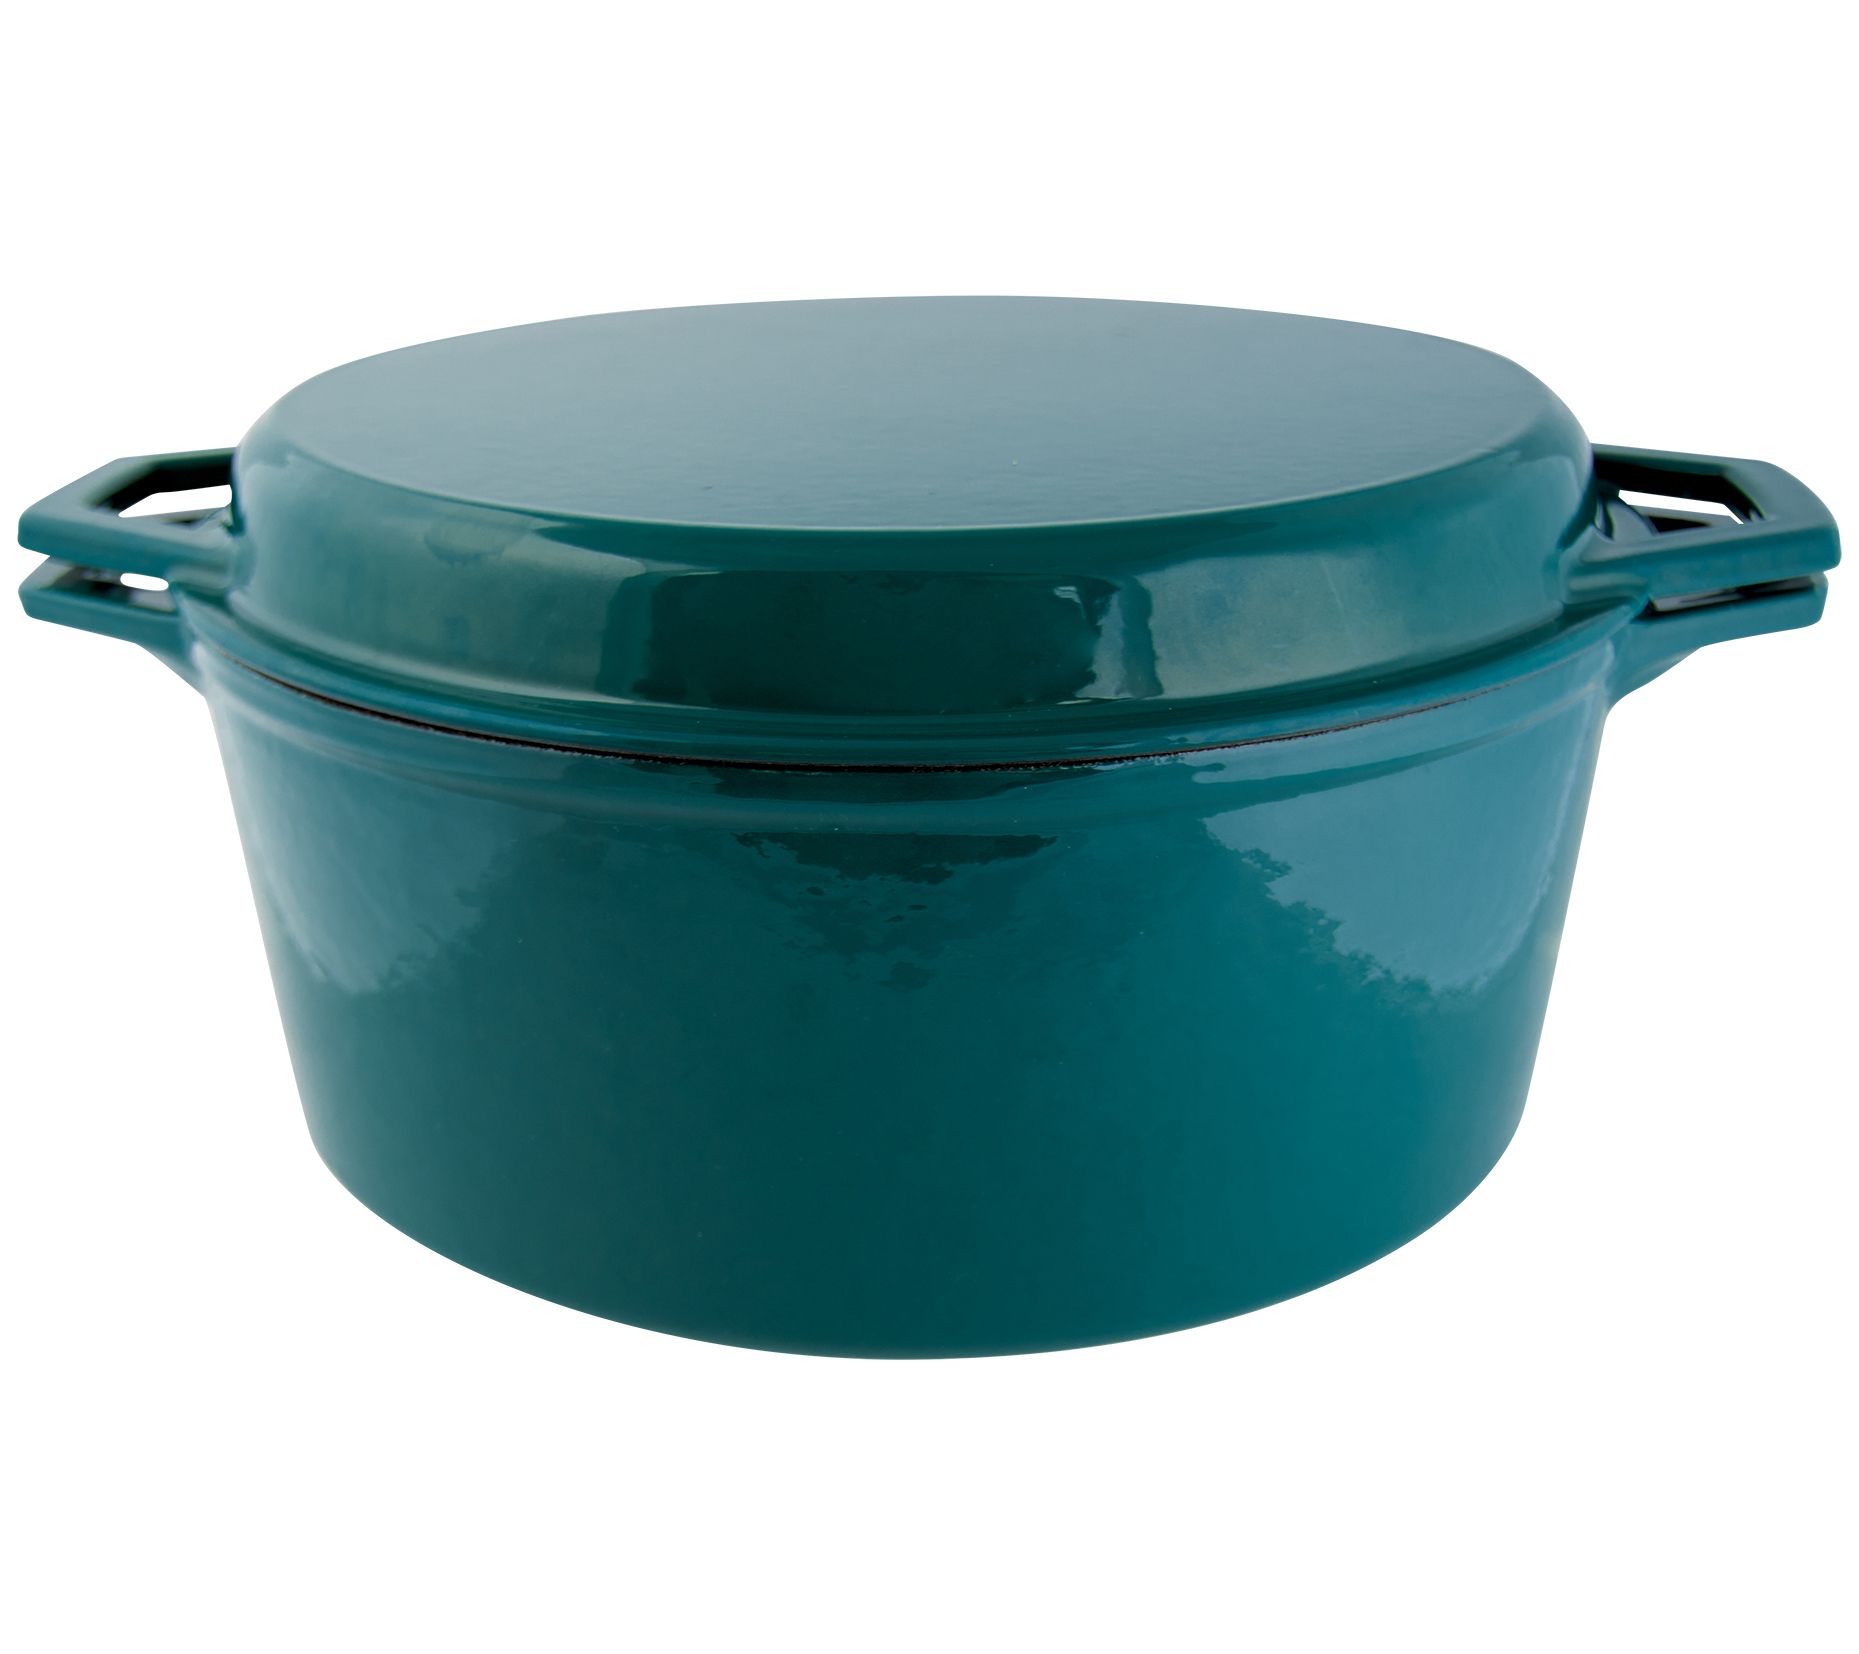 Taste of Home 7-Qt Enameled Cast Iron Dutch Oven w/ Grill Lid 